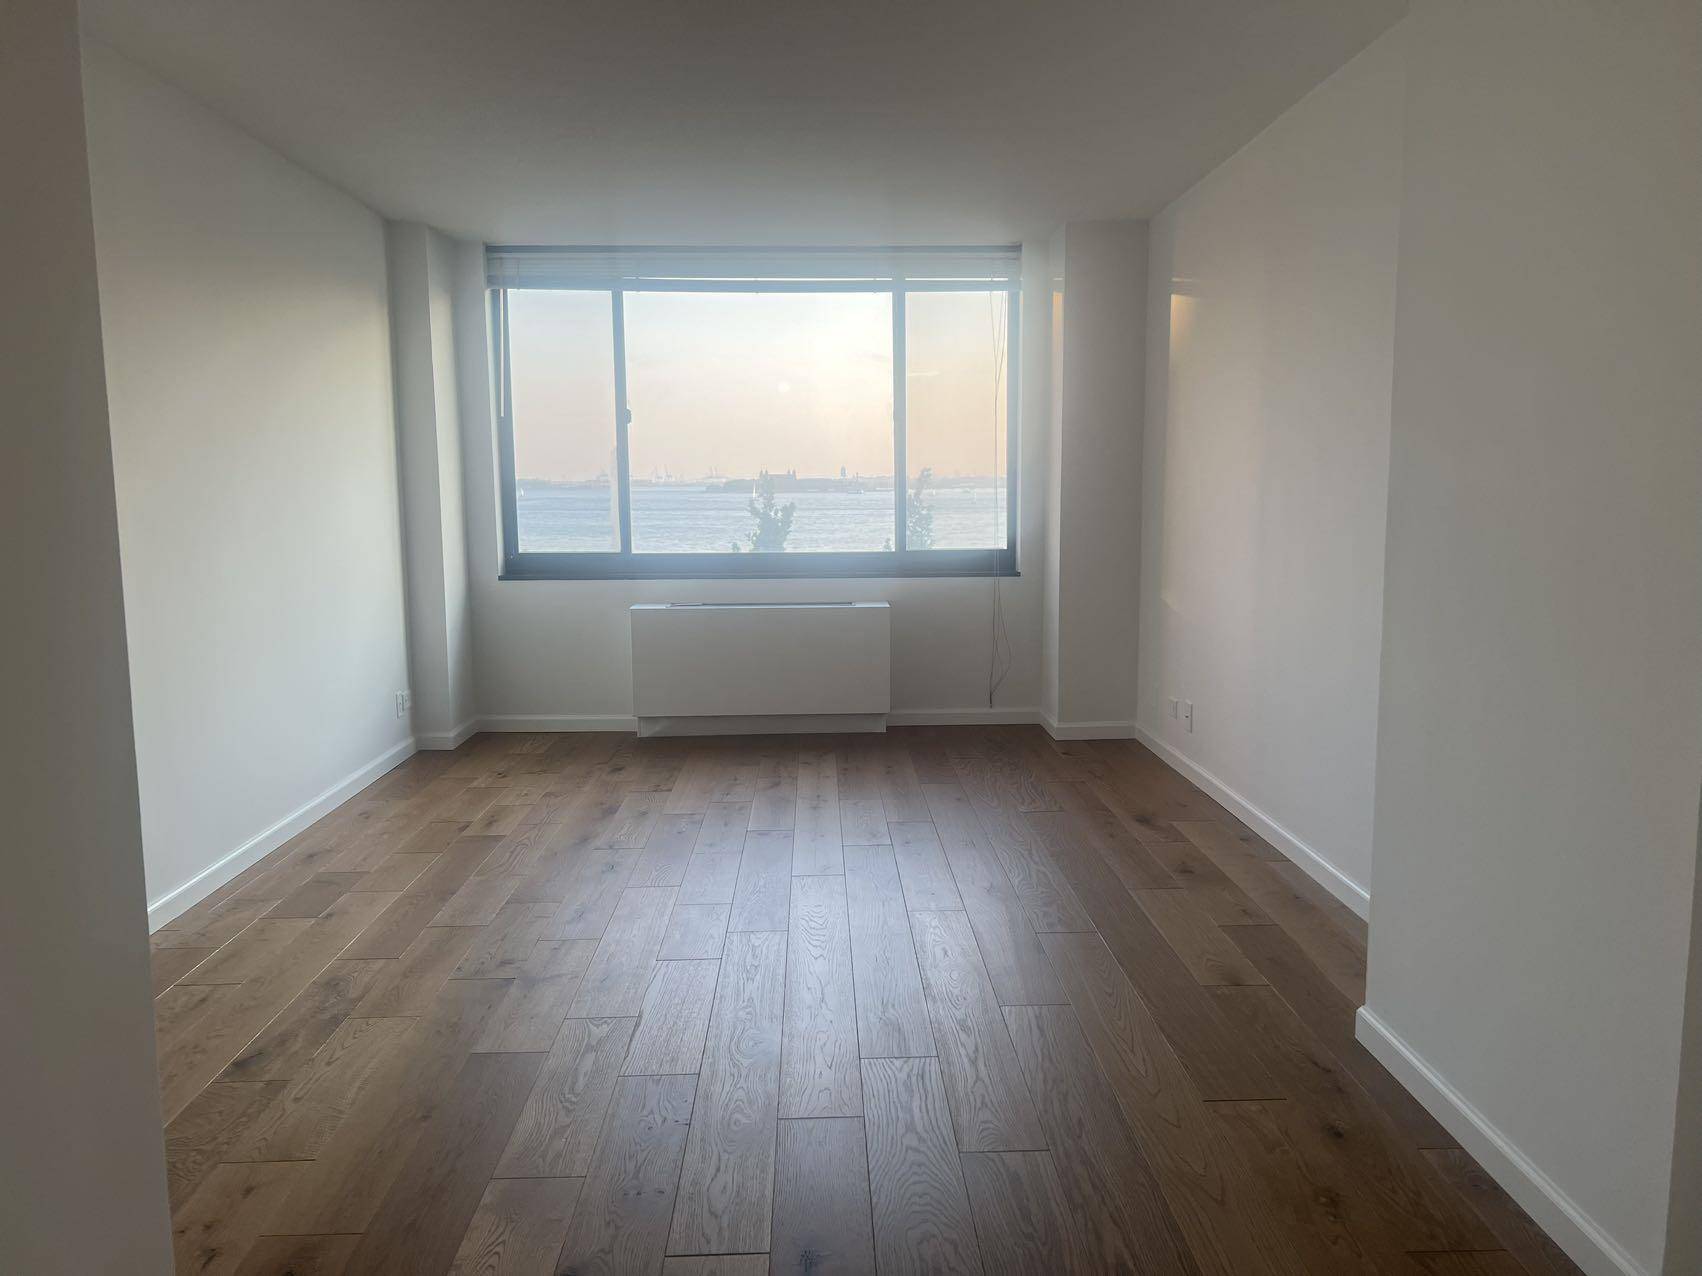 This renovated west facing 1BR 1BA residence features a generously proportioned living space with direct river and Statue of liberty views.